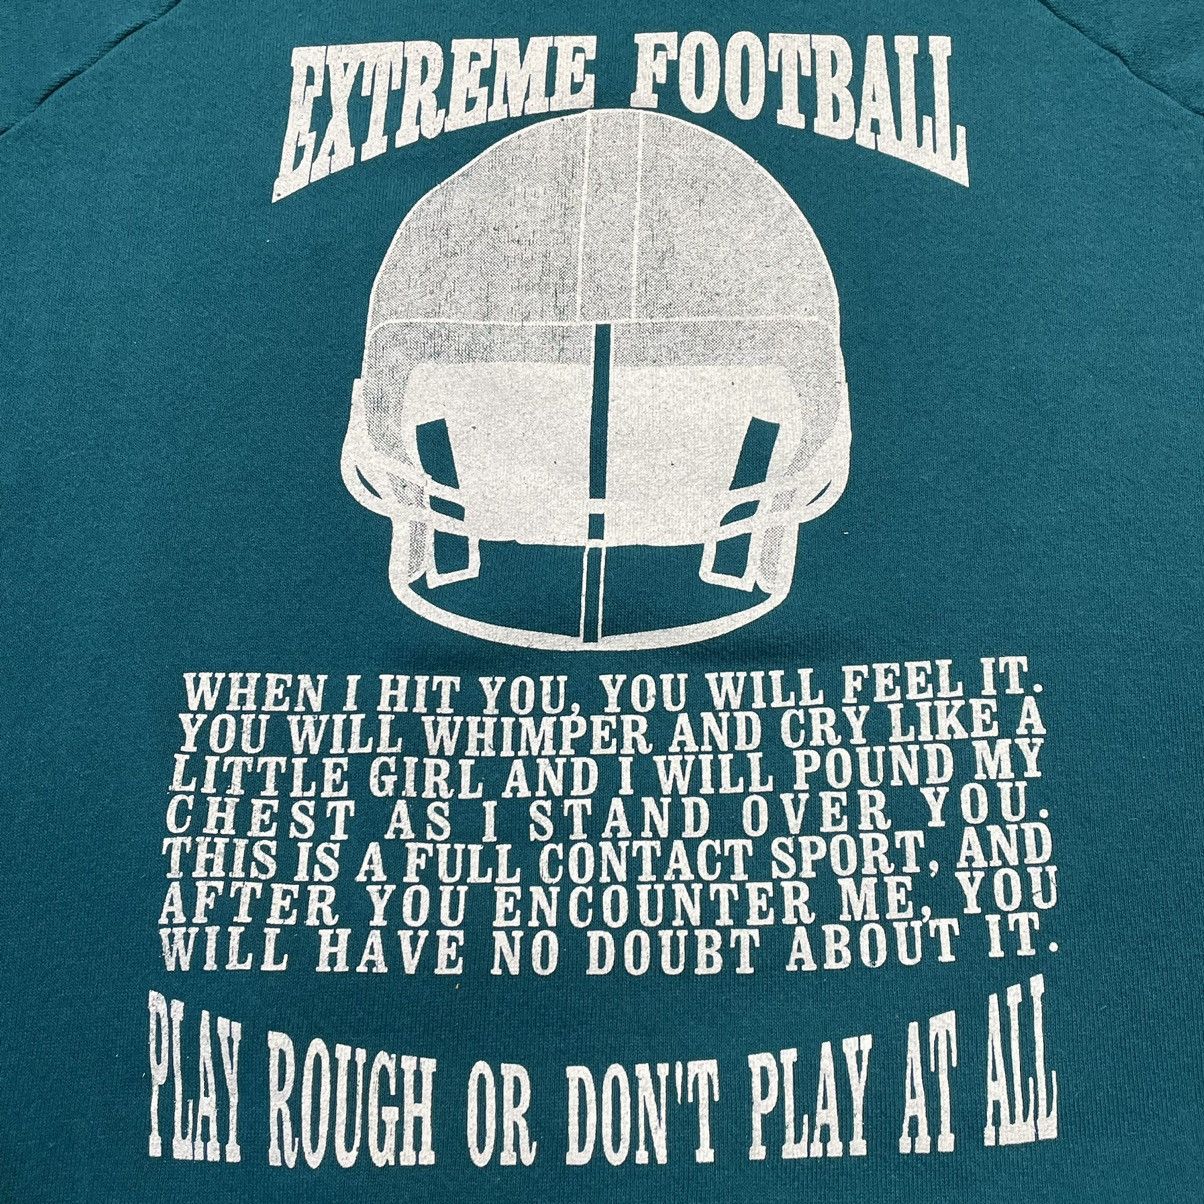 Vintage Vintage Made In USA Extreme Football Comedy Crewneck Large Size US L / EU 52-54 / 3 - 5 Thumbnail